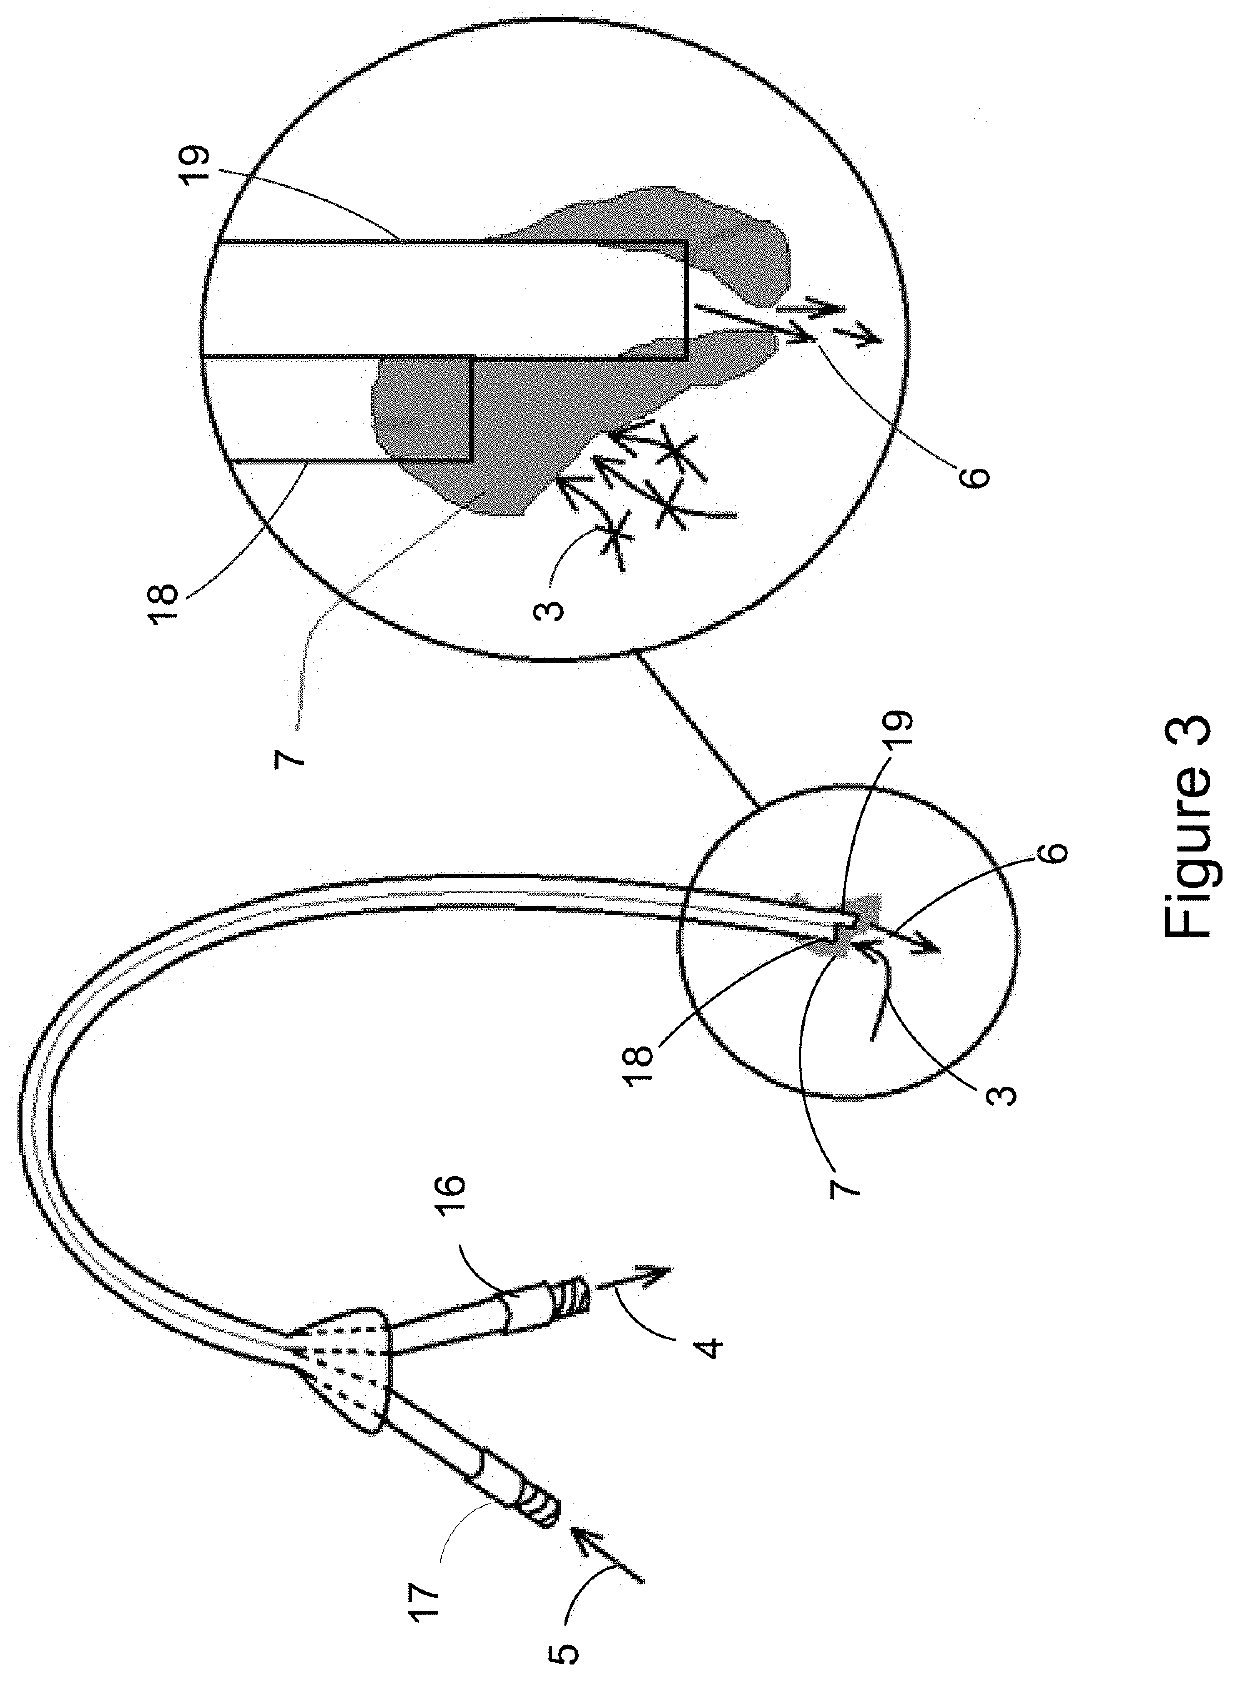 Catheter clearance device and method of use